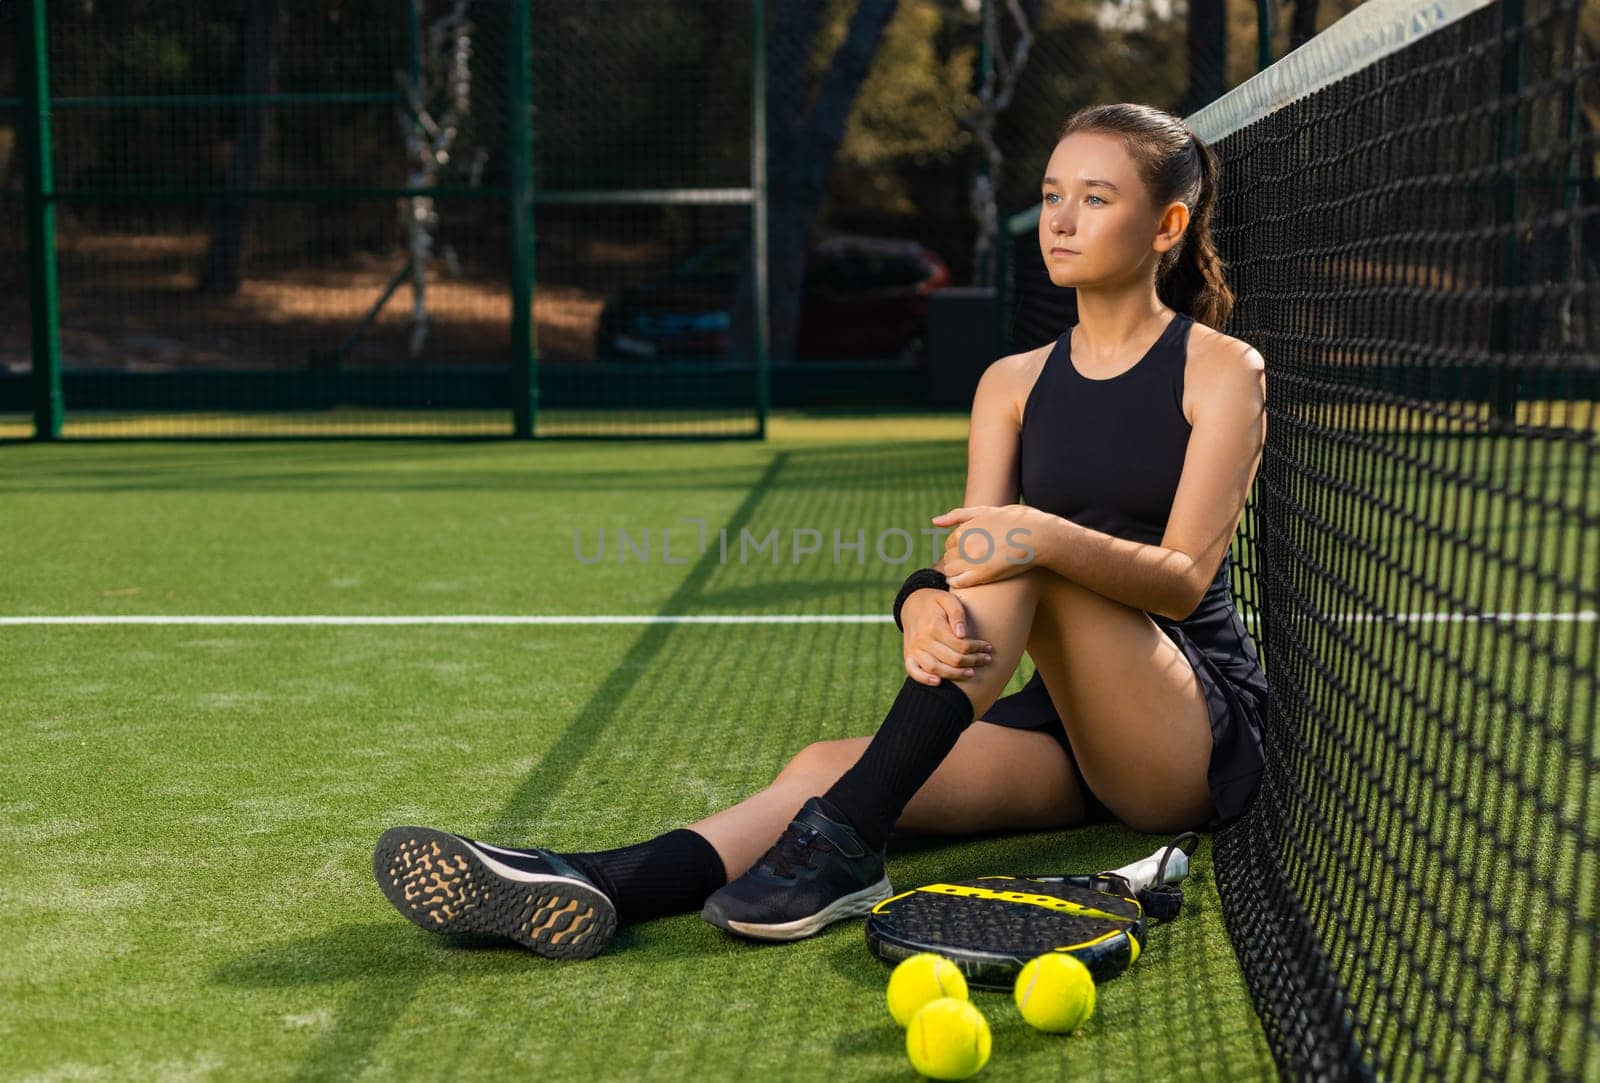 Padel tennis player with racket. Girl athlete with paddle racket on court outdoors. Sport concept. Download a high quality photo for the design of a sports app or web site